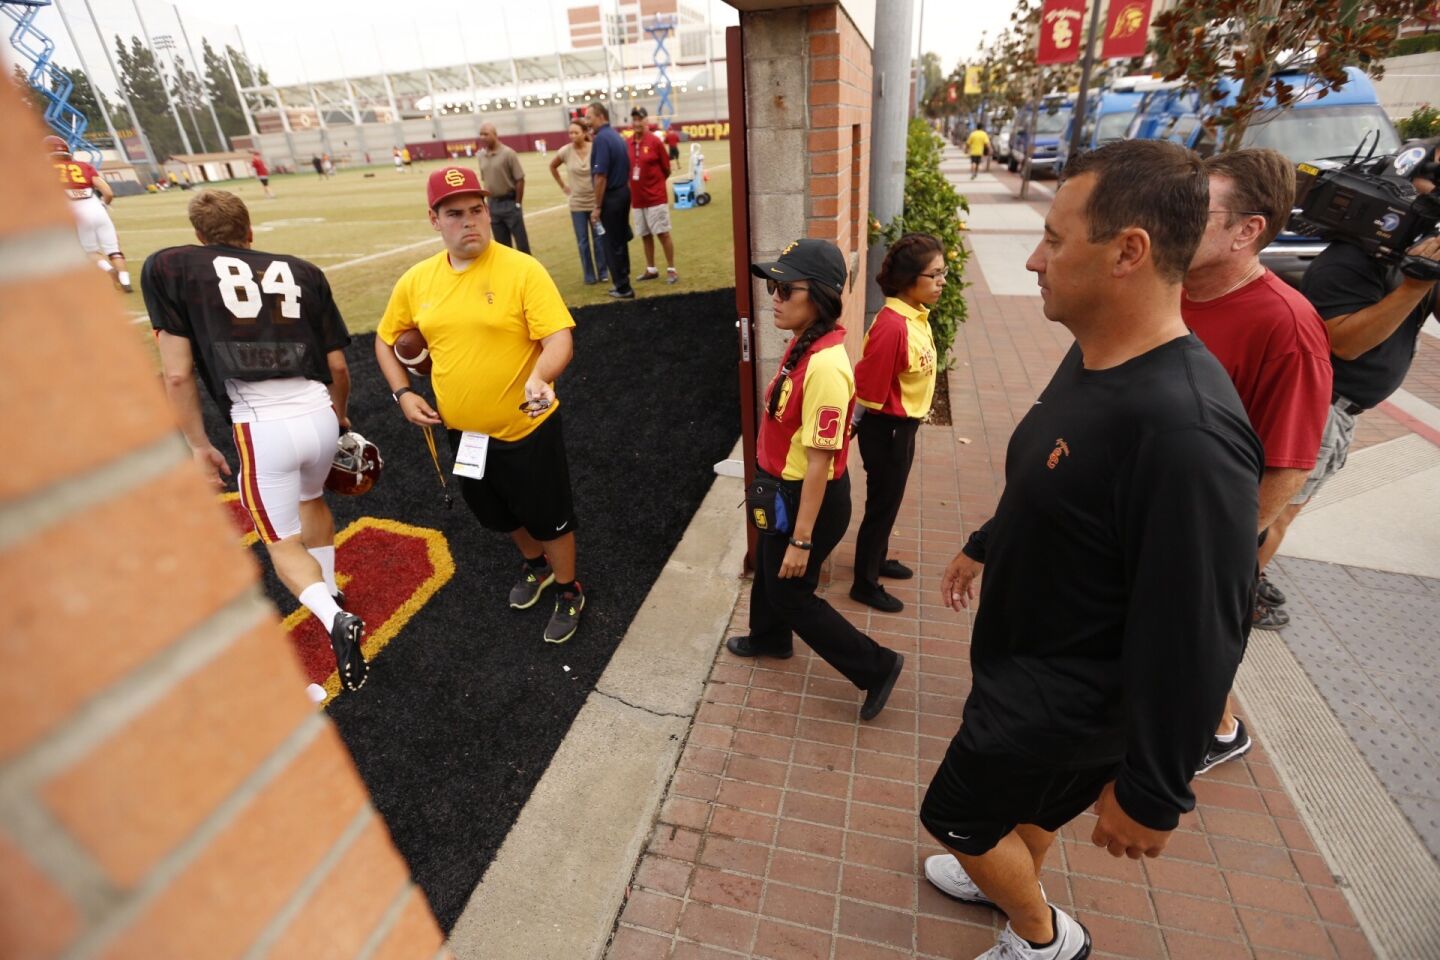 USC football Coach Steve Sarkisian takes to the practice field after addressing the media about his behavior and language during a booster event days earlier.